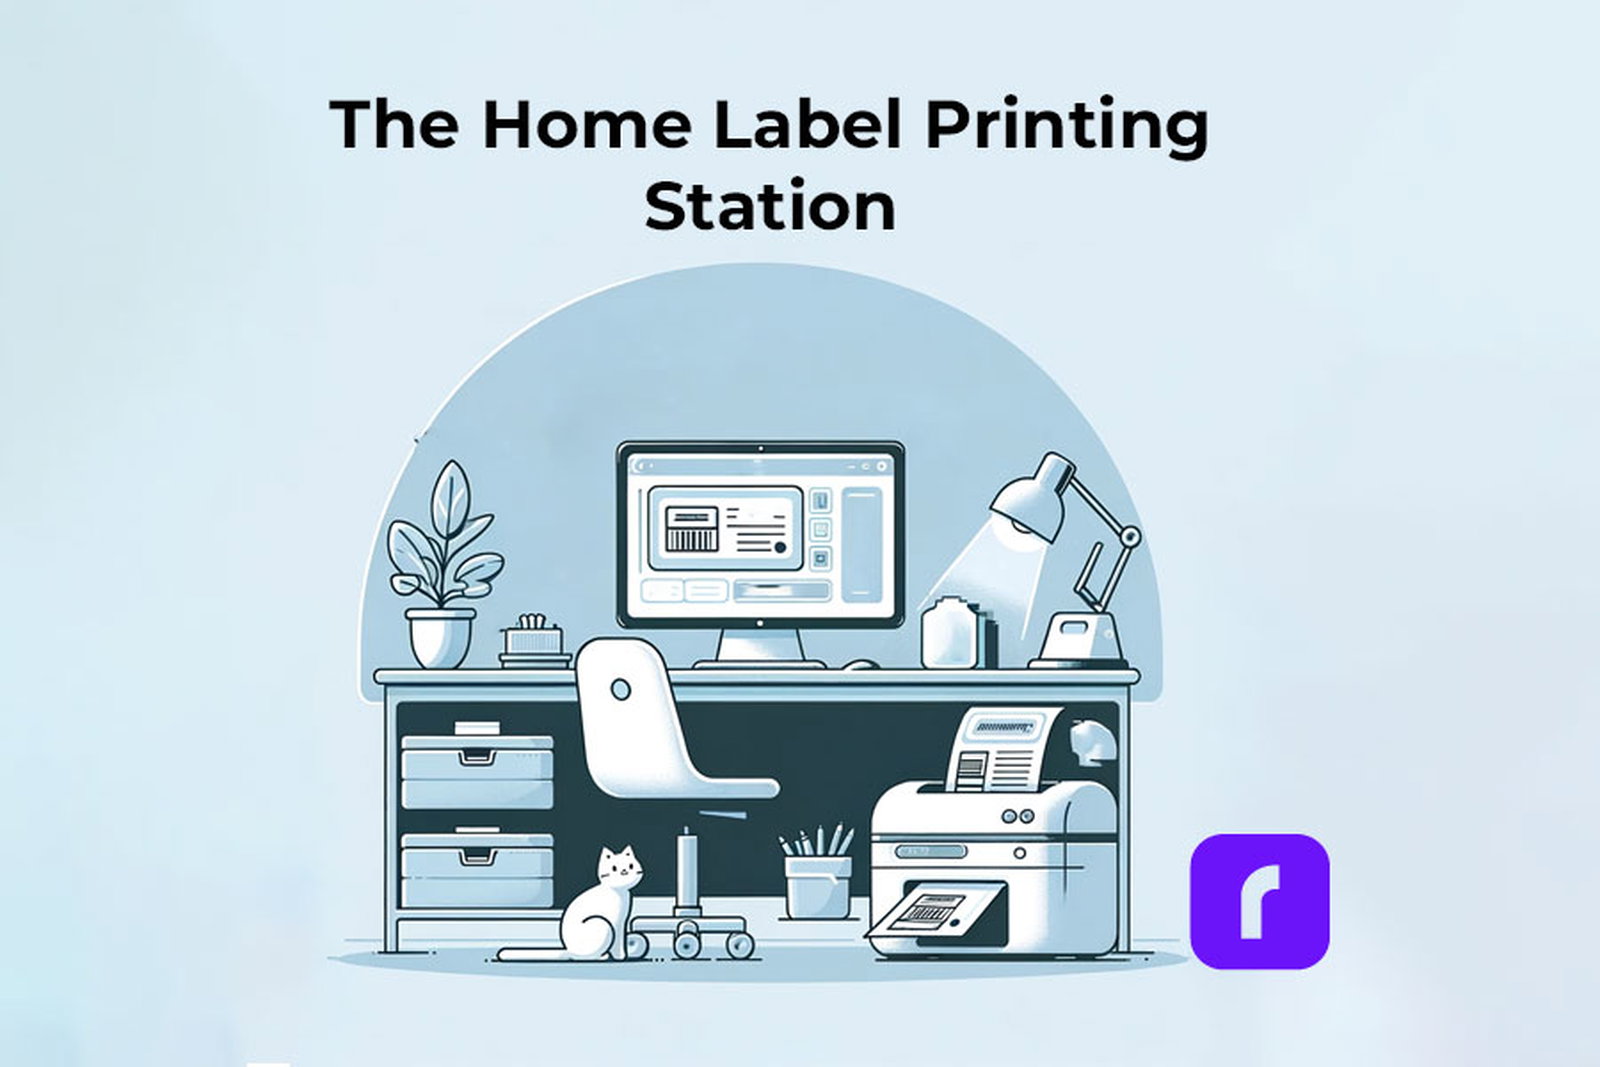 The Home Label Printing Station